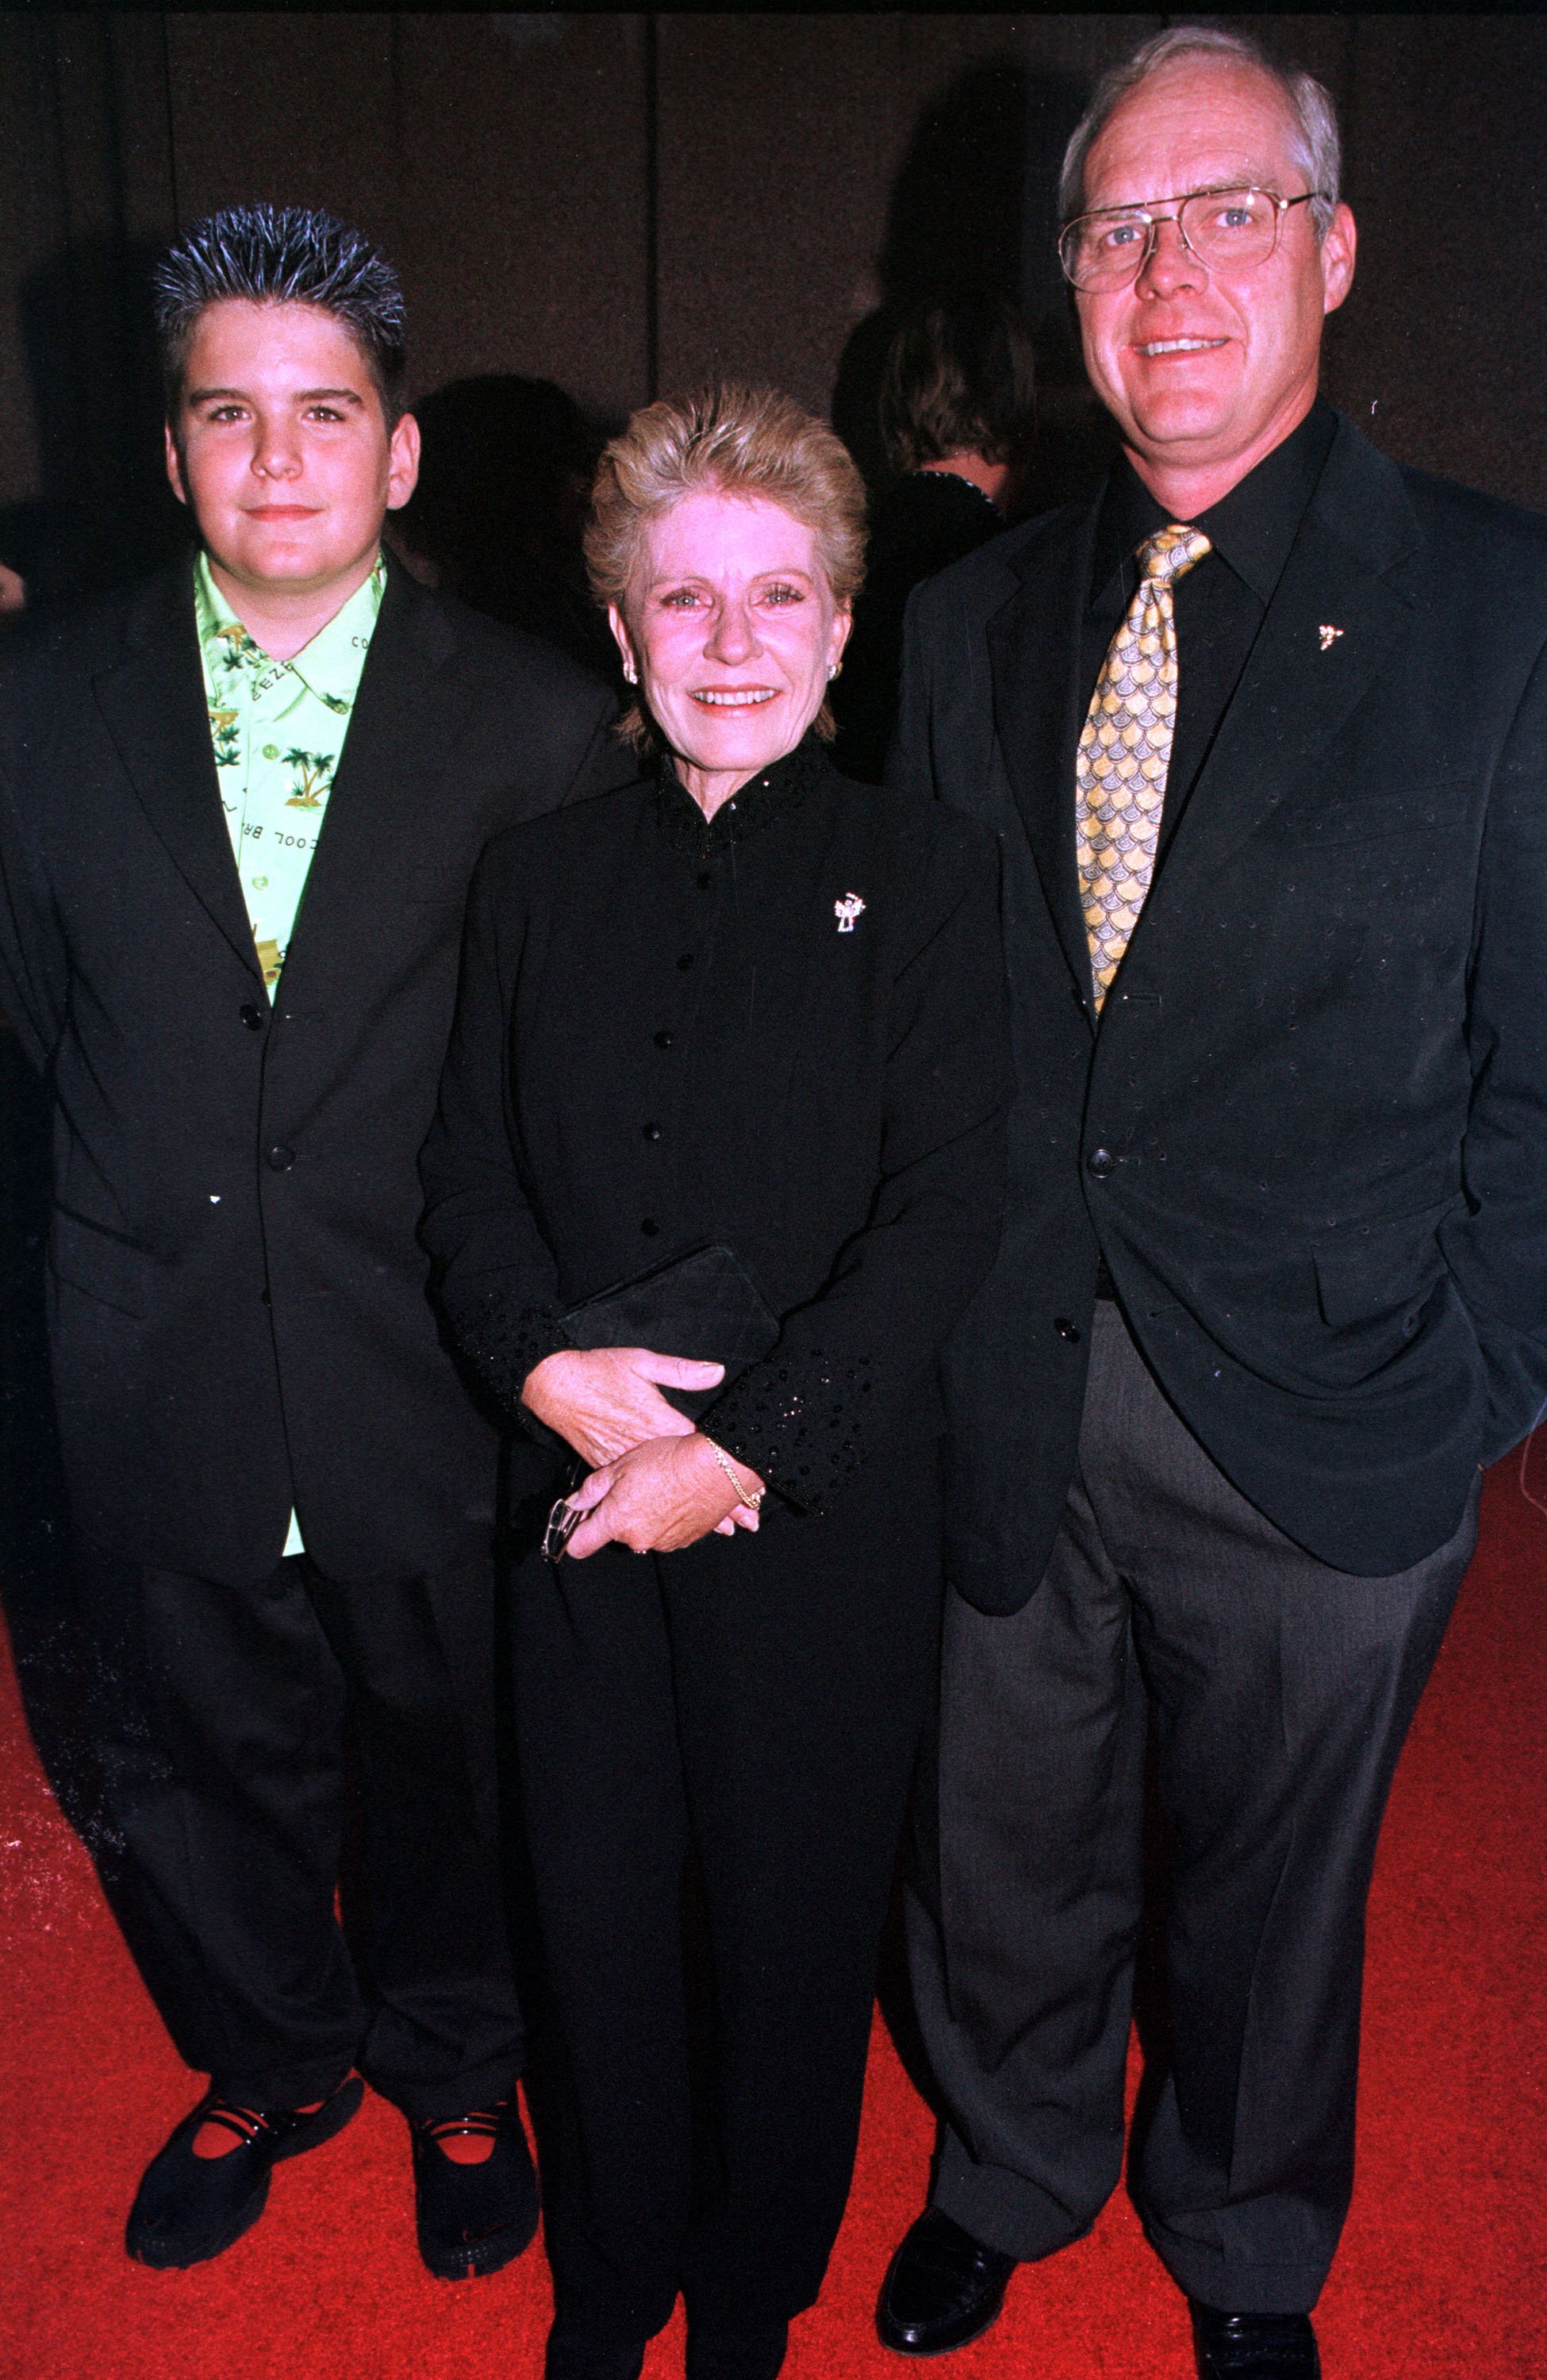 Patty Duke, her husband and her son arrive for the Michael Jackson concert at Madison Square Garden on September 7, 2001 in New York City. Photo: Getty Images